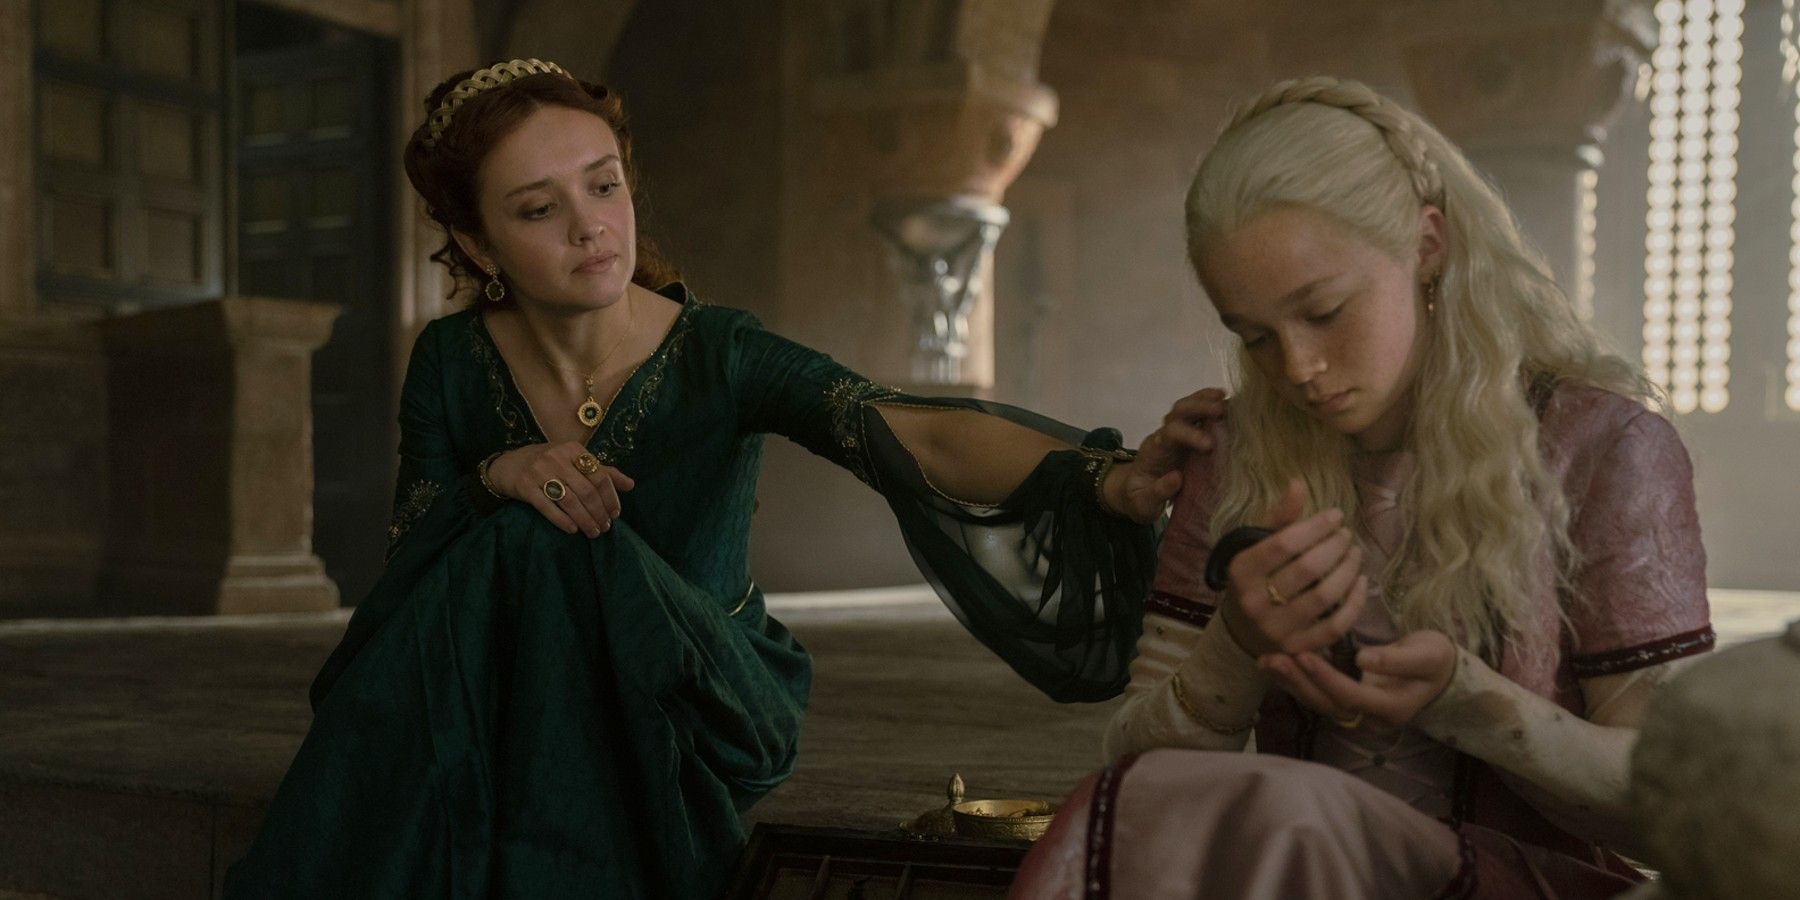 Alicent Hightower (Olivia Cooke) and Helaena Targaryen (Evie Allen) in House of the Dragon.